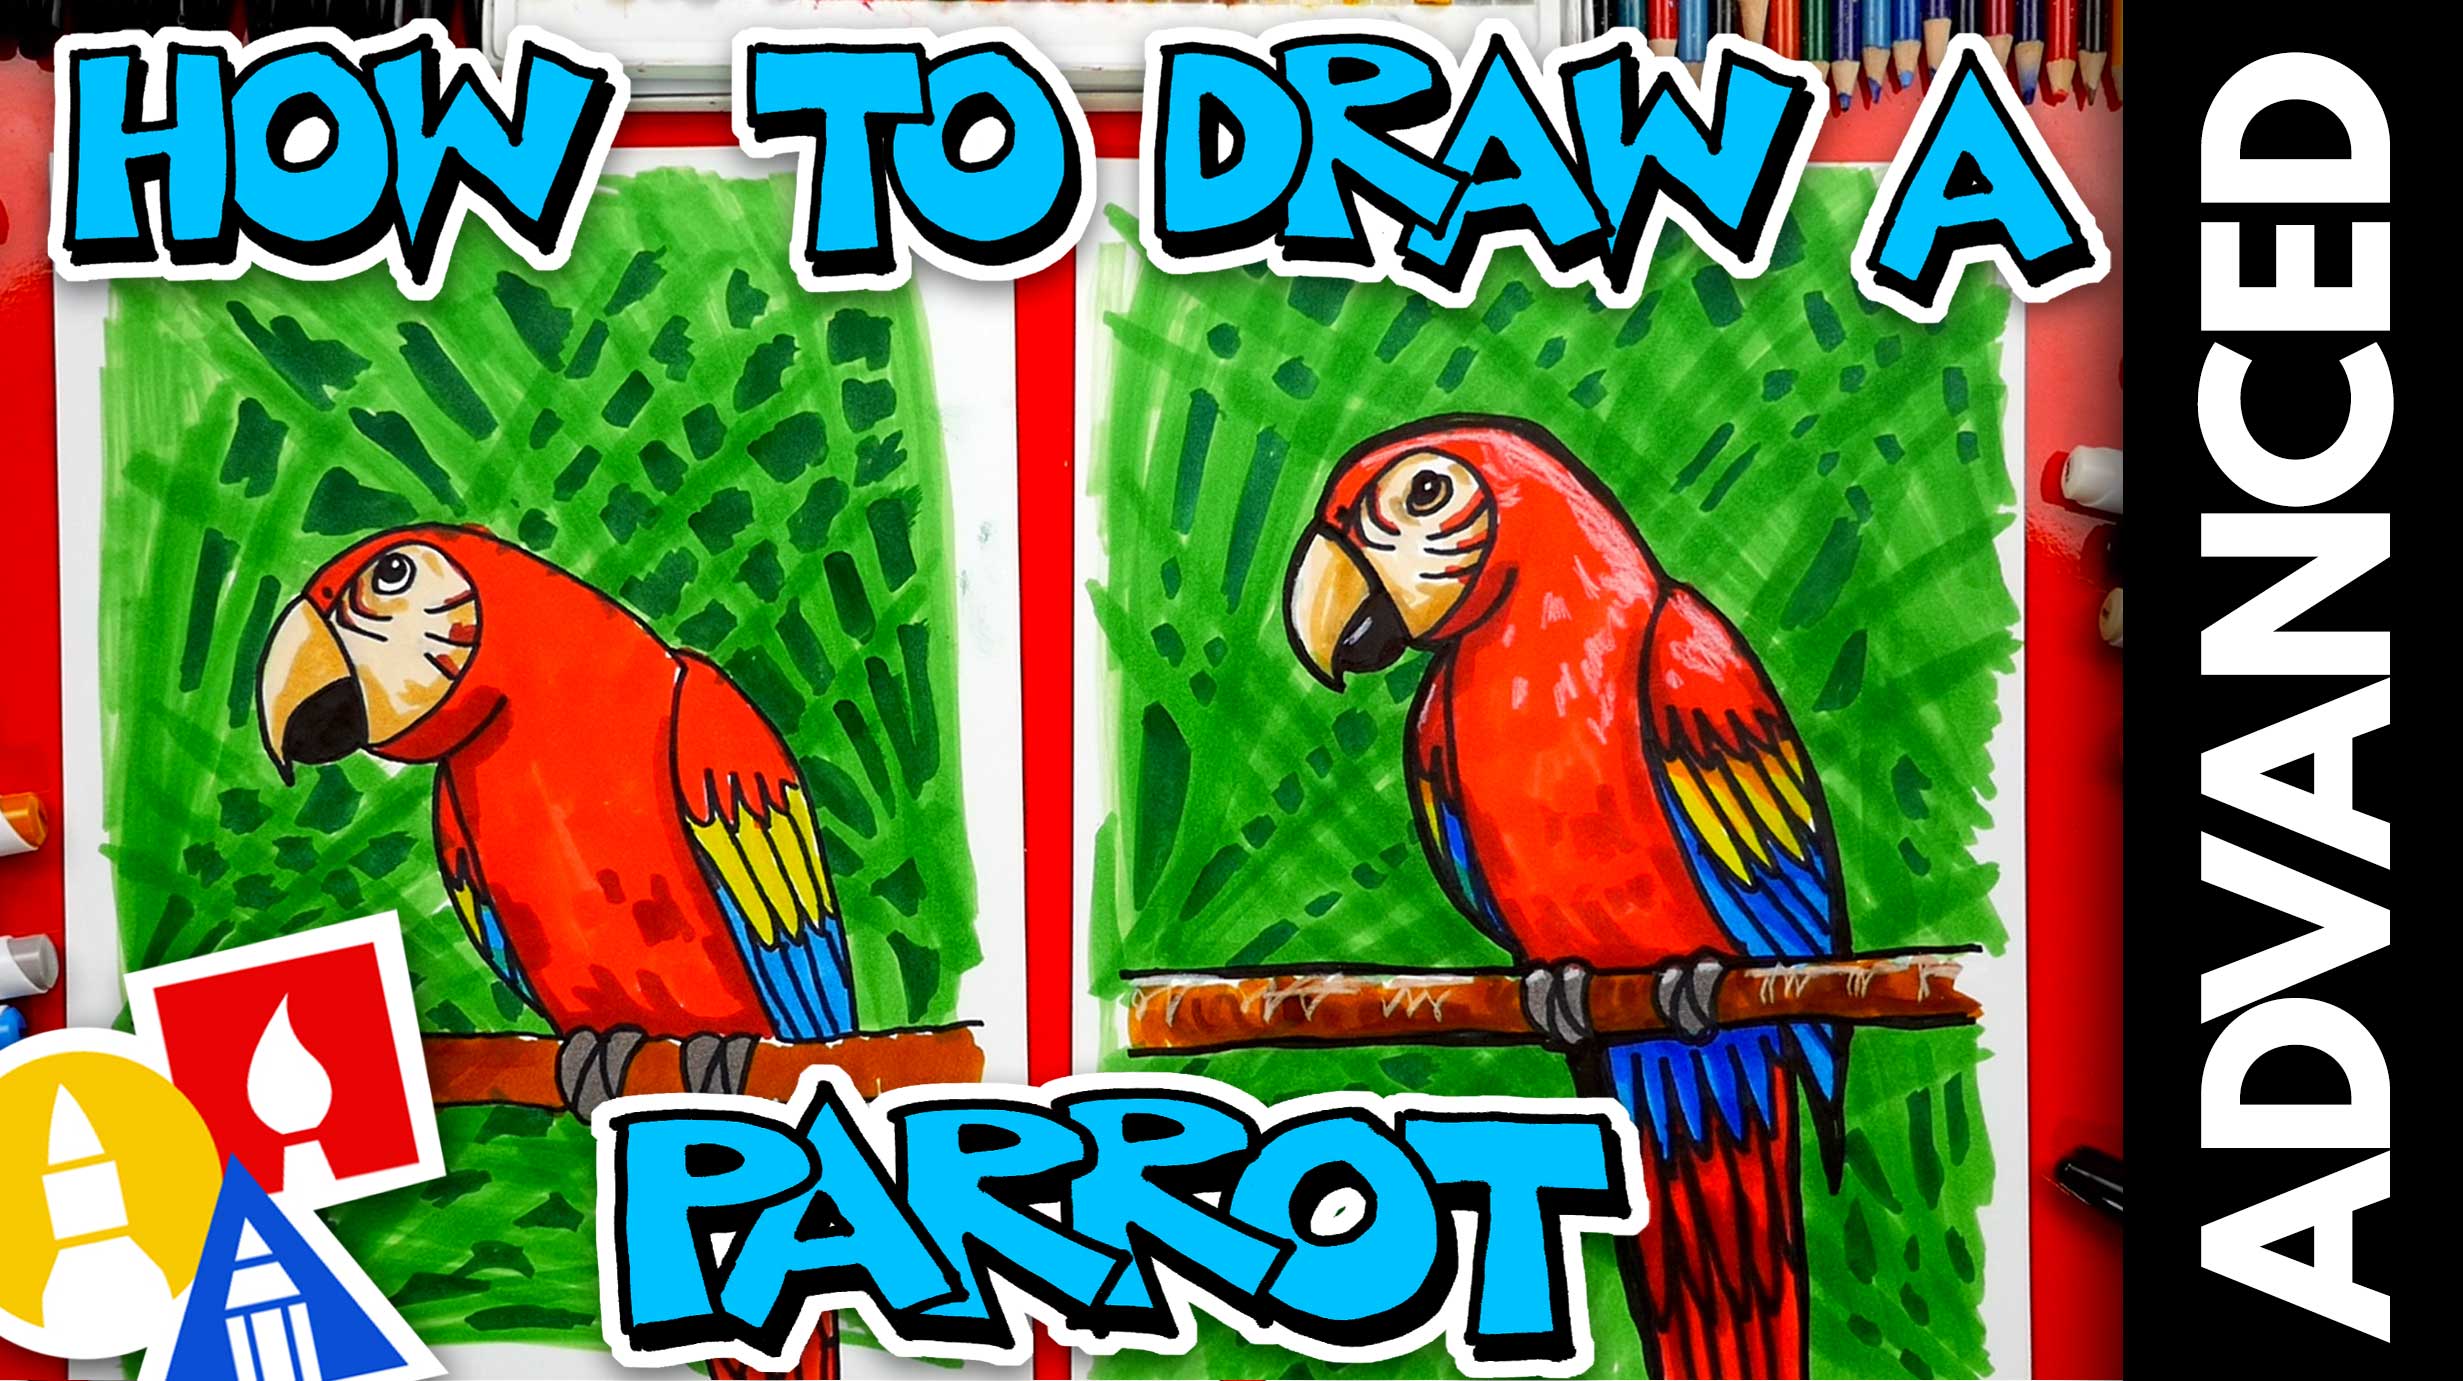 How to draw a Macaw parrot. Step-by-step drawing lesson.